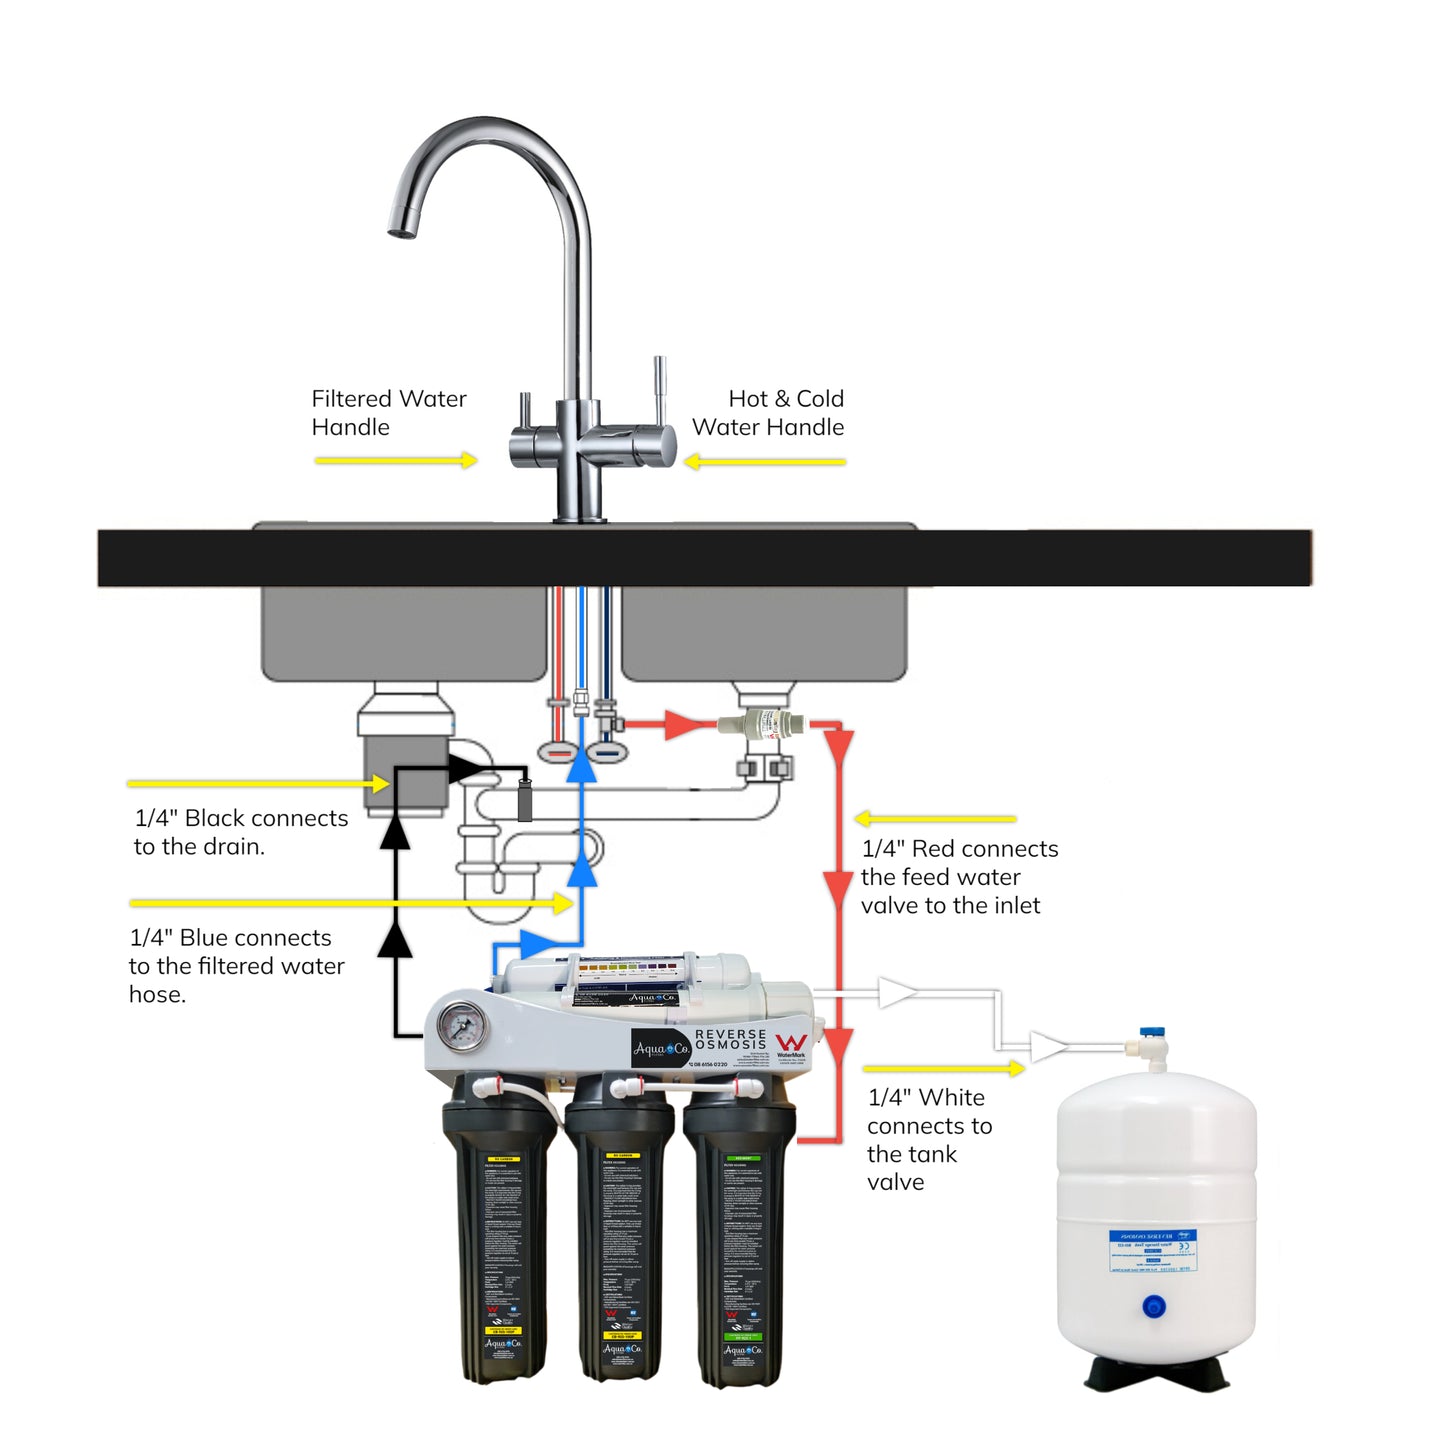 Bundle Deal: AquaCo 5 Stage Reverse Osmosis with 3 Way Mixer – Avoid Drilling a Hole and Replace Your Kitchen Mixer with a 3 Way Tap